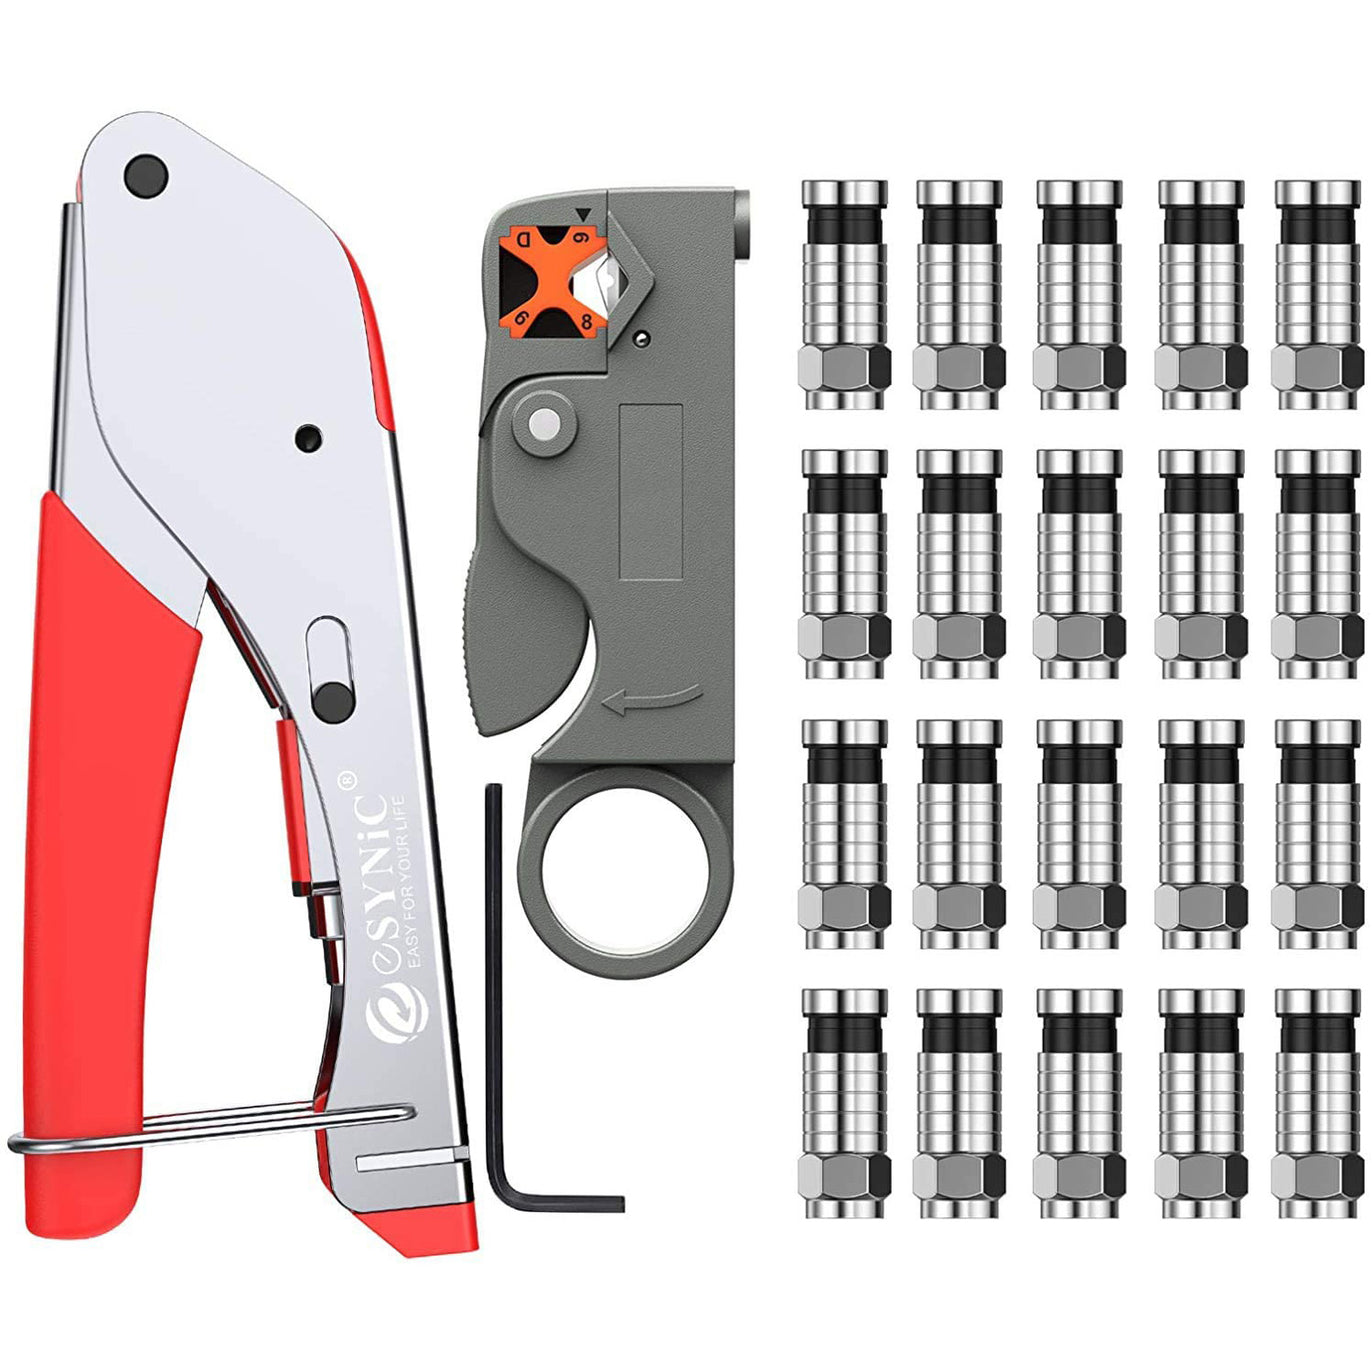 eSynic Coax Cable Crimper Tool Kit